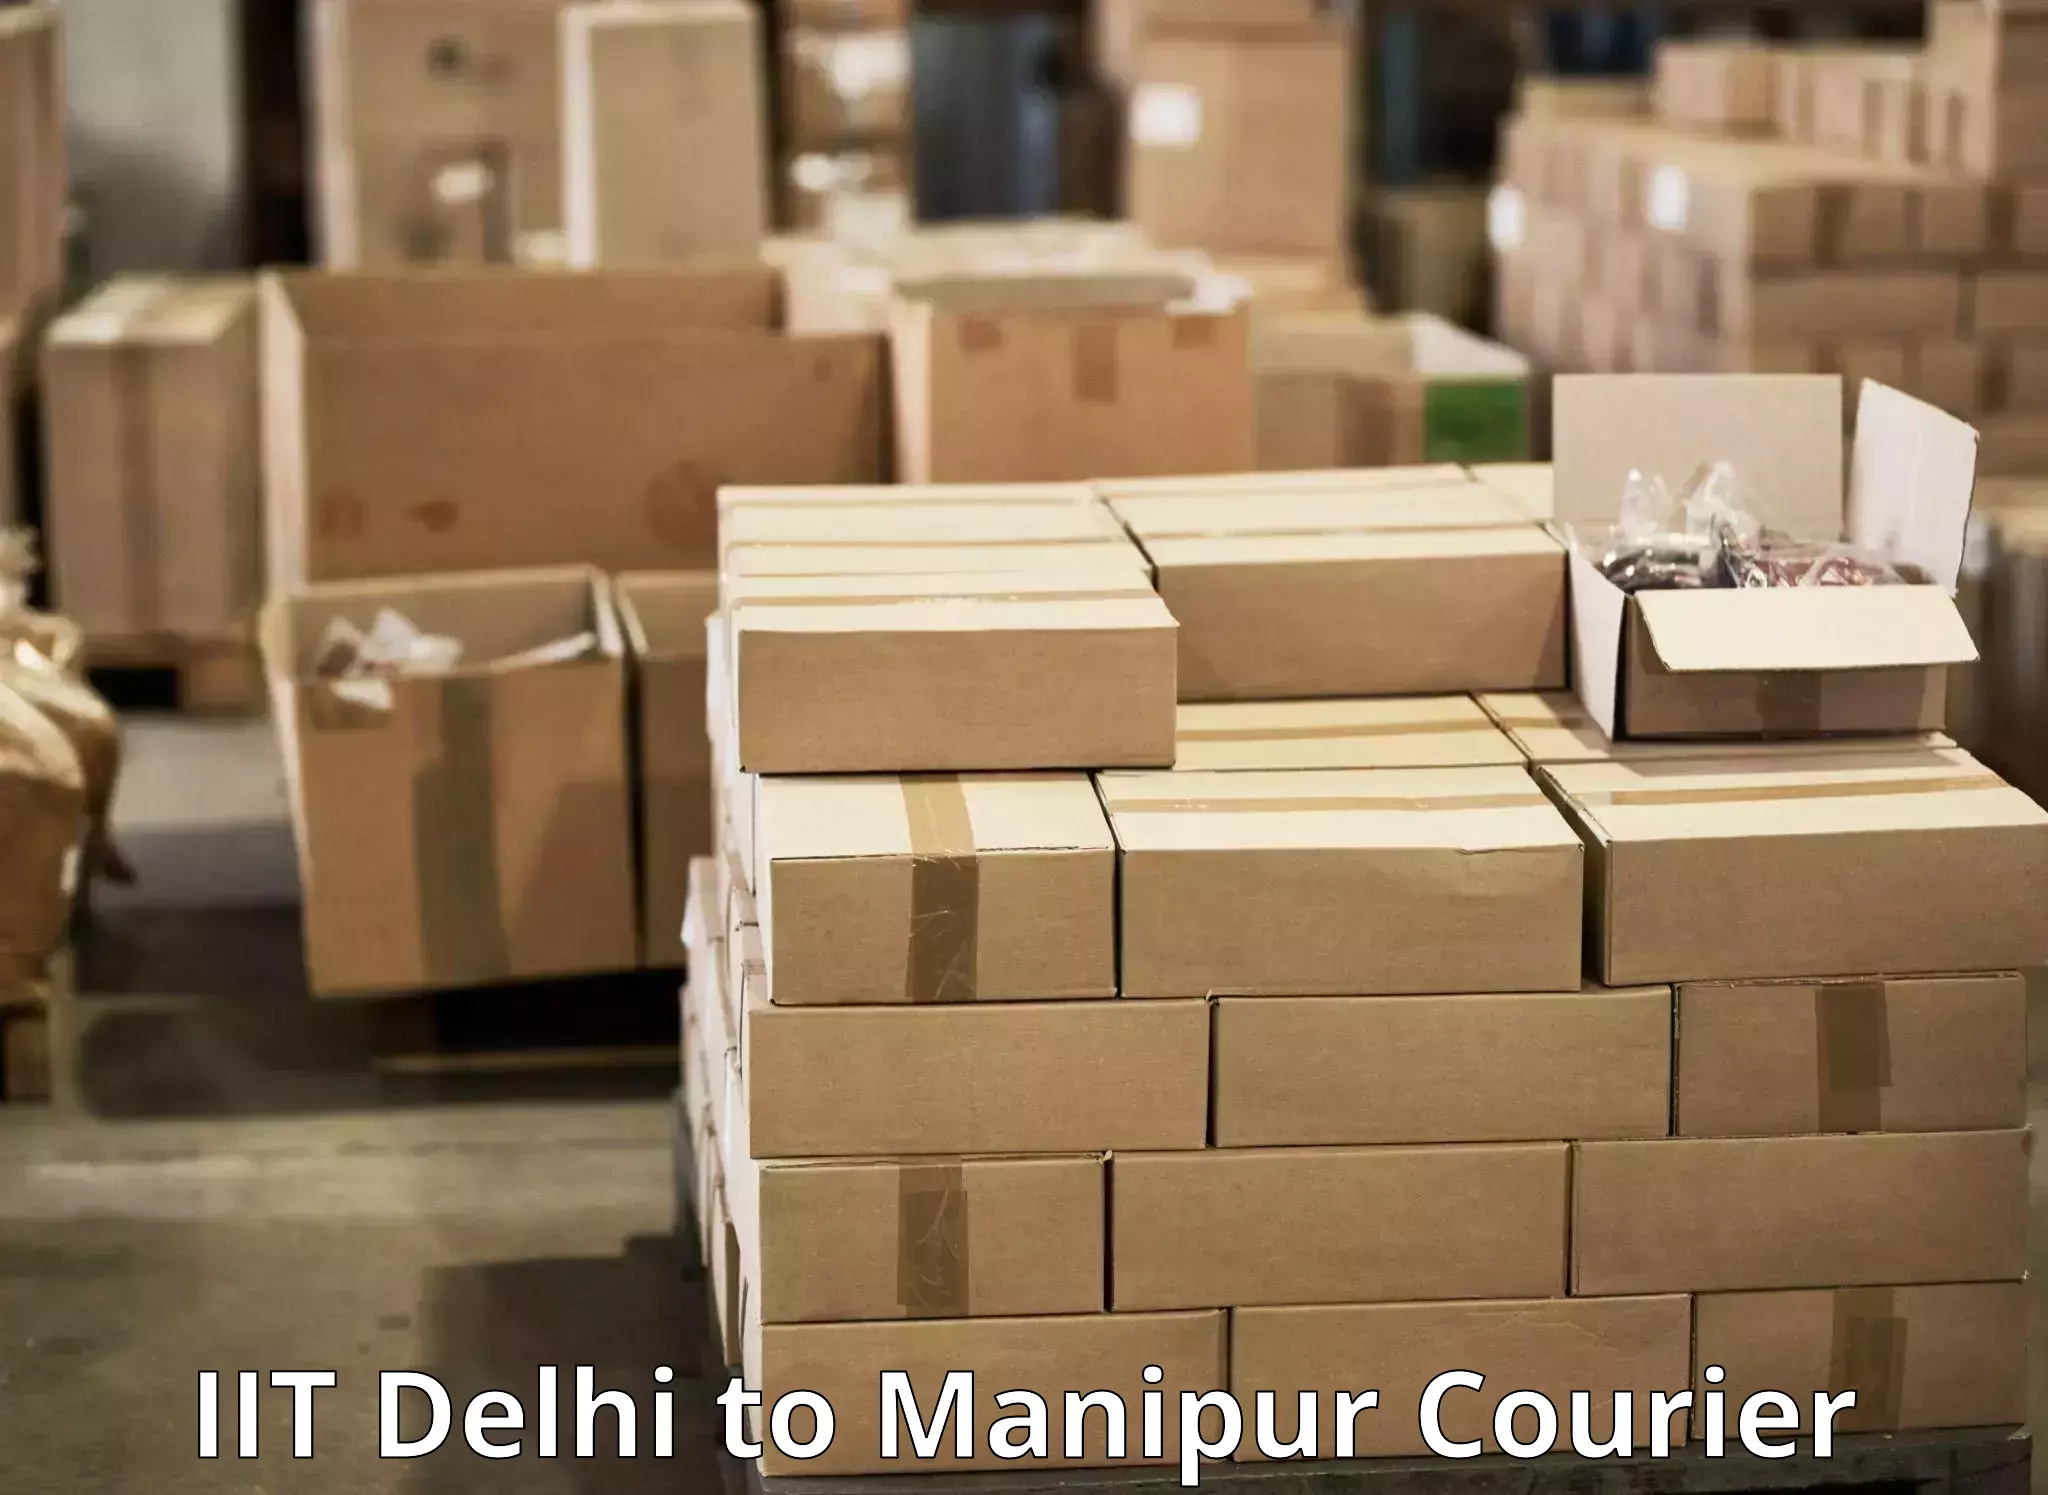 Global shipping networks IIT Delhi to NIT Manipur